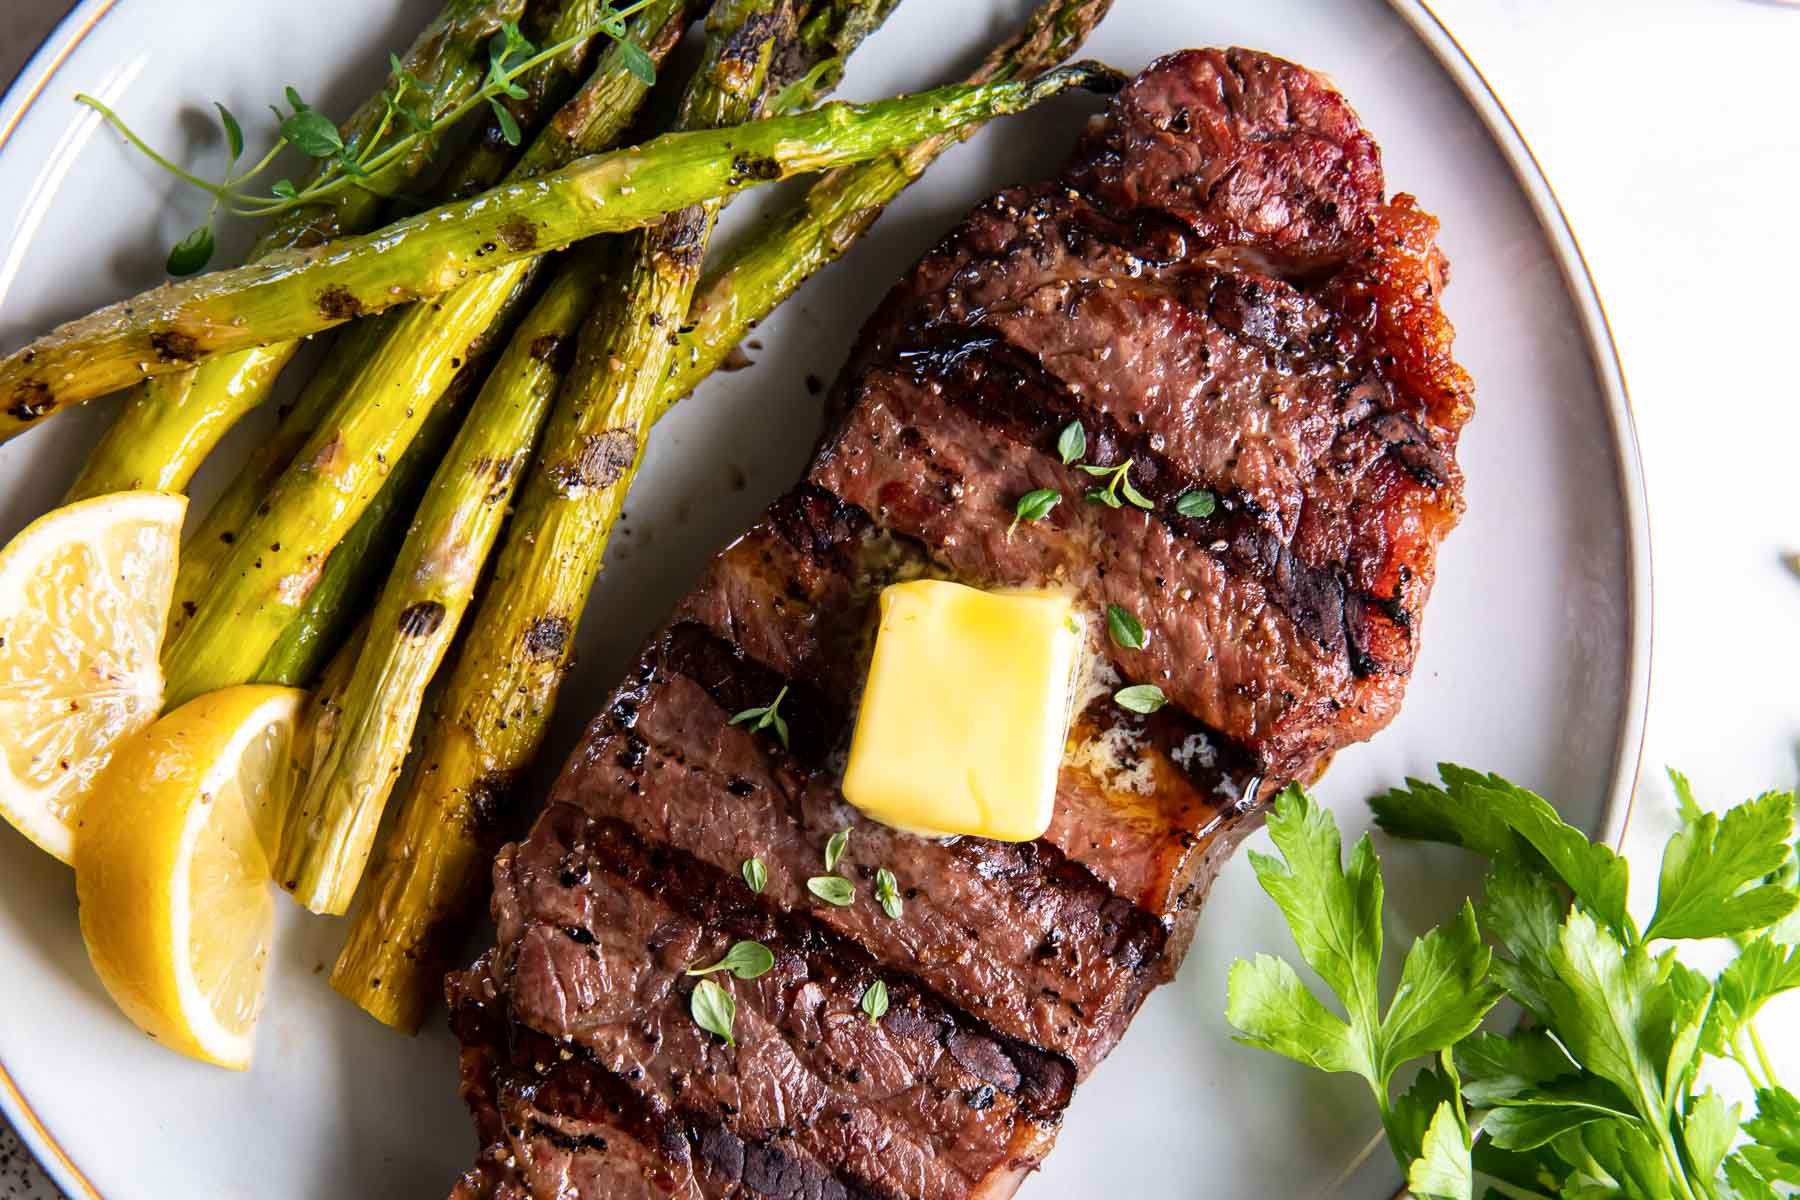 https://kristineskitchenblog.com/wp-content/uploads/2022/05/how-to-grill-a-perfect-steak-14-2.jpg